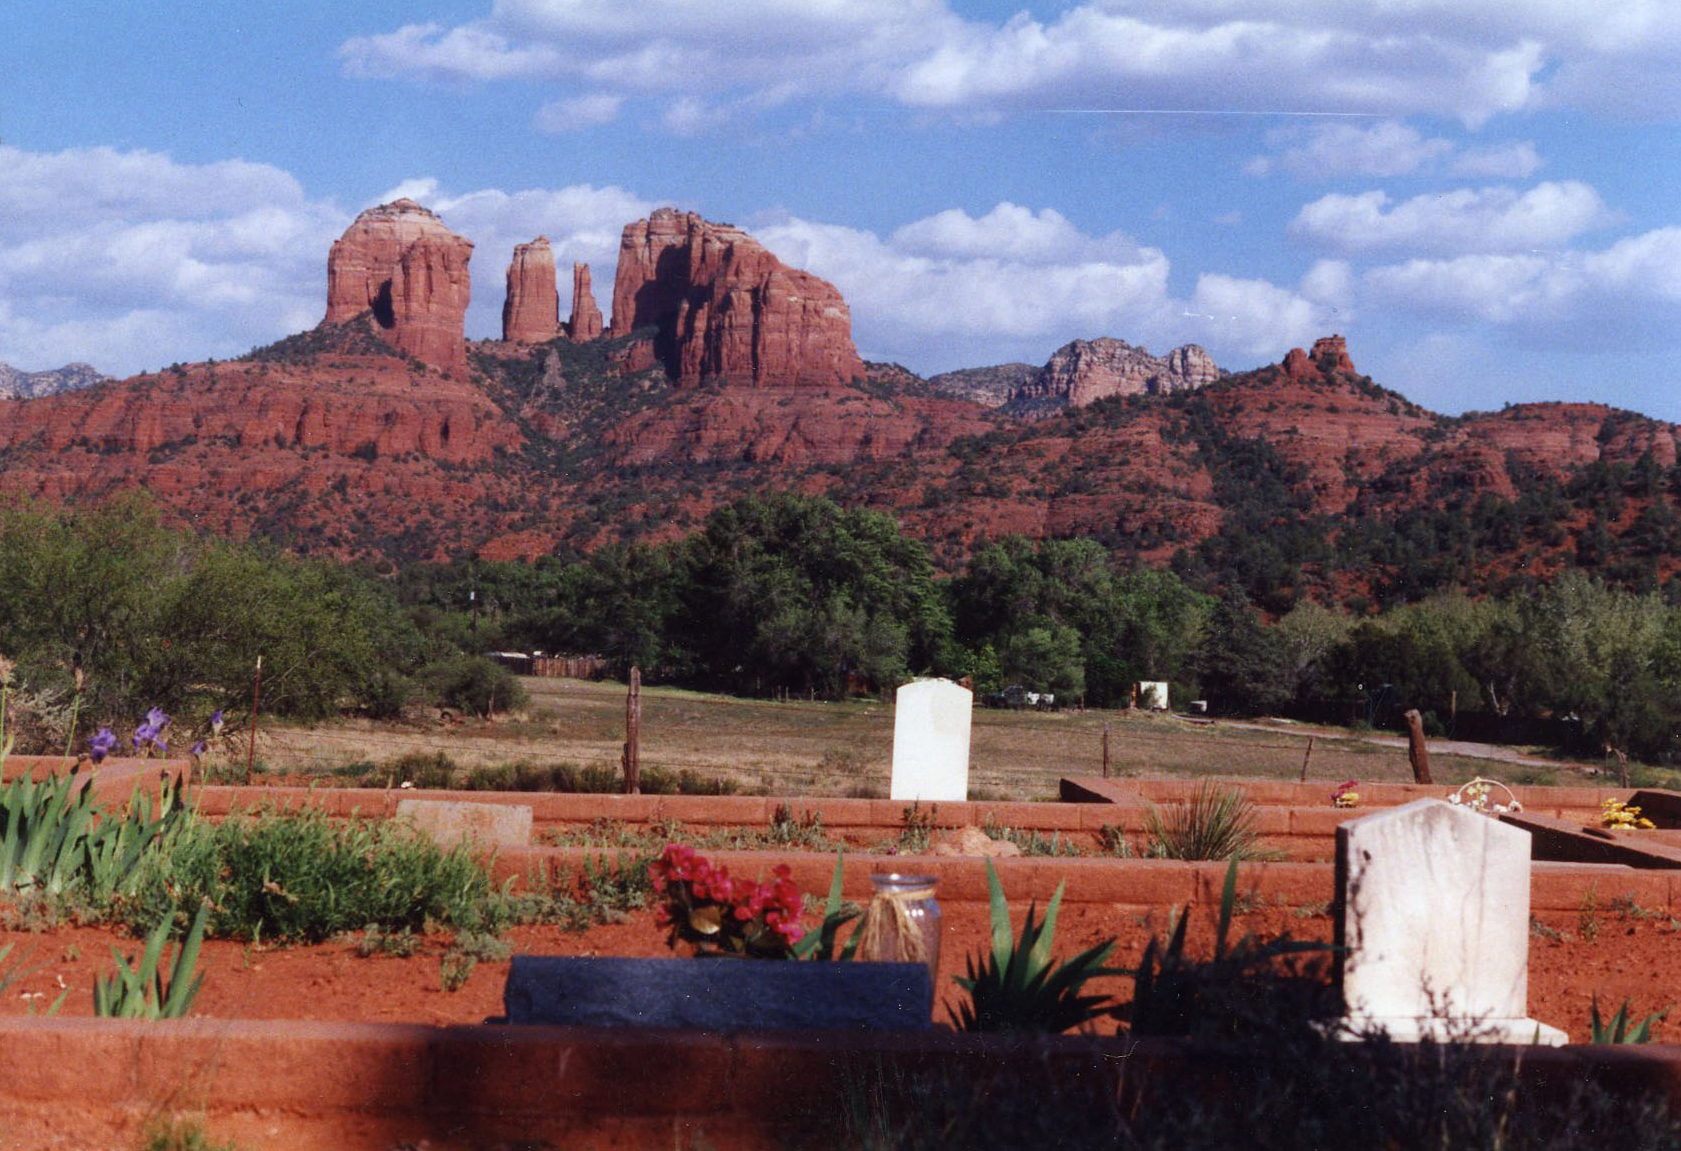 The Schuerman Red Rock cemetery was our area’s first cemetery, established in 1893 for the burial of a child.